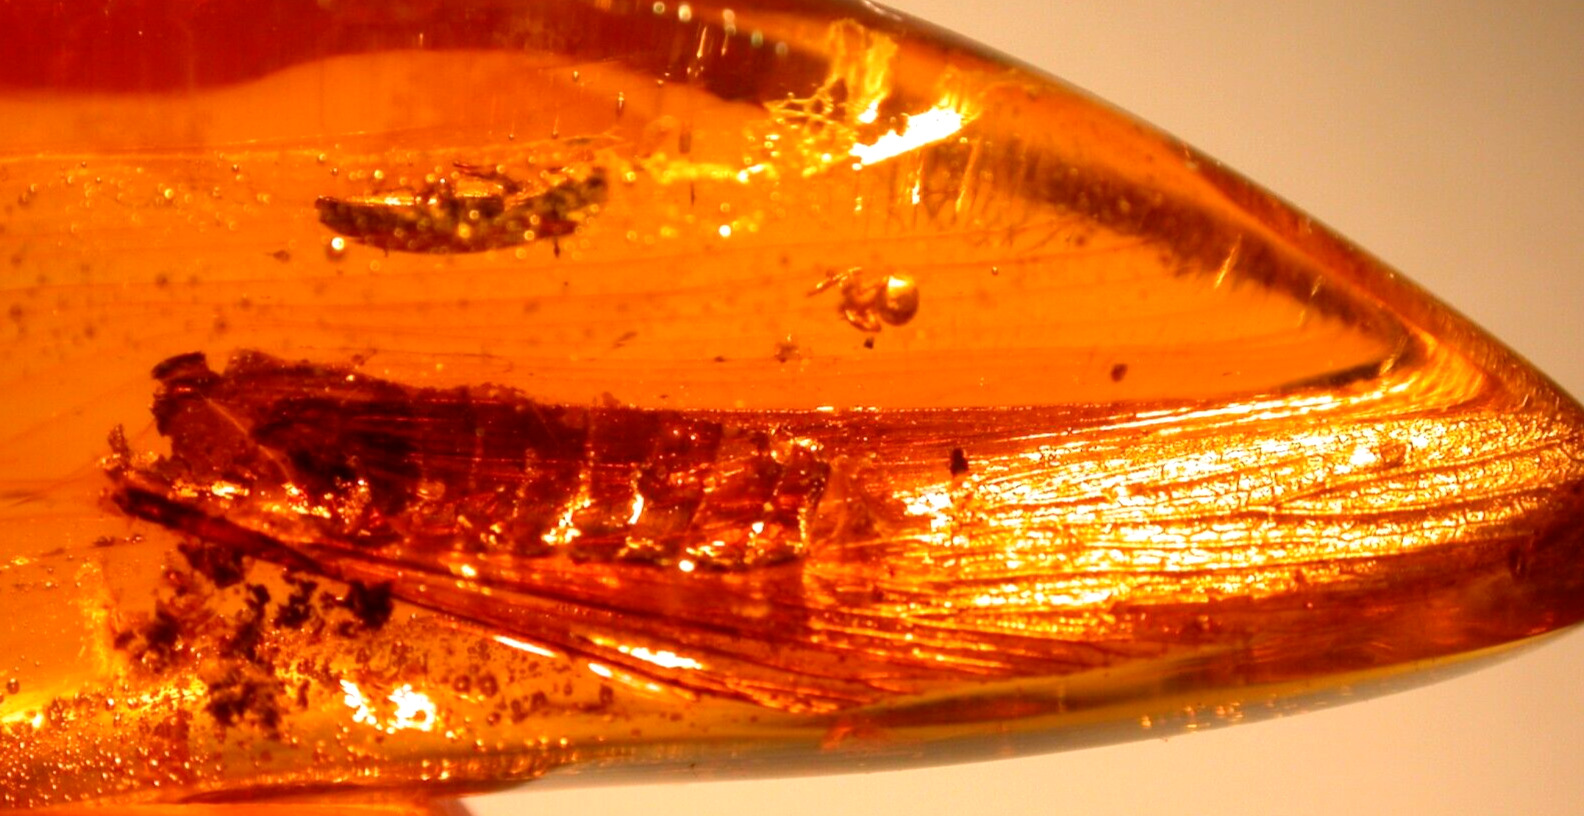 GIANT Golden Mastotermes Termite Wings with Spider in Dominican Amber Fossil